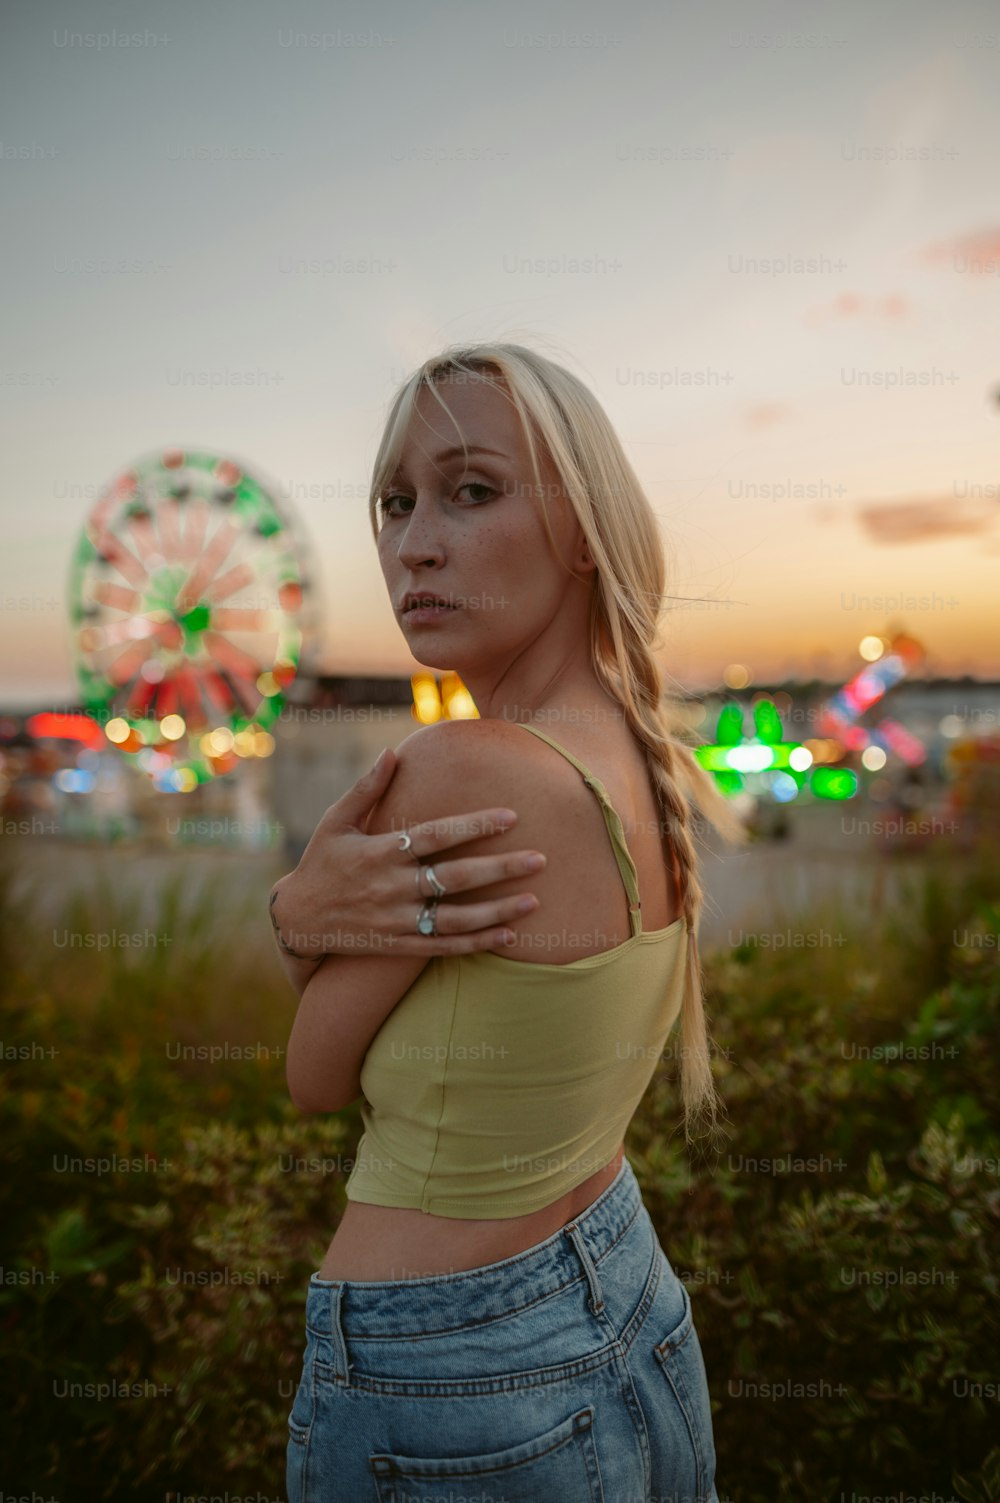 a woman in a yellow top standing in front of a ferris wheel